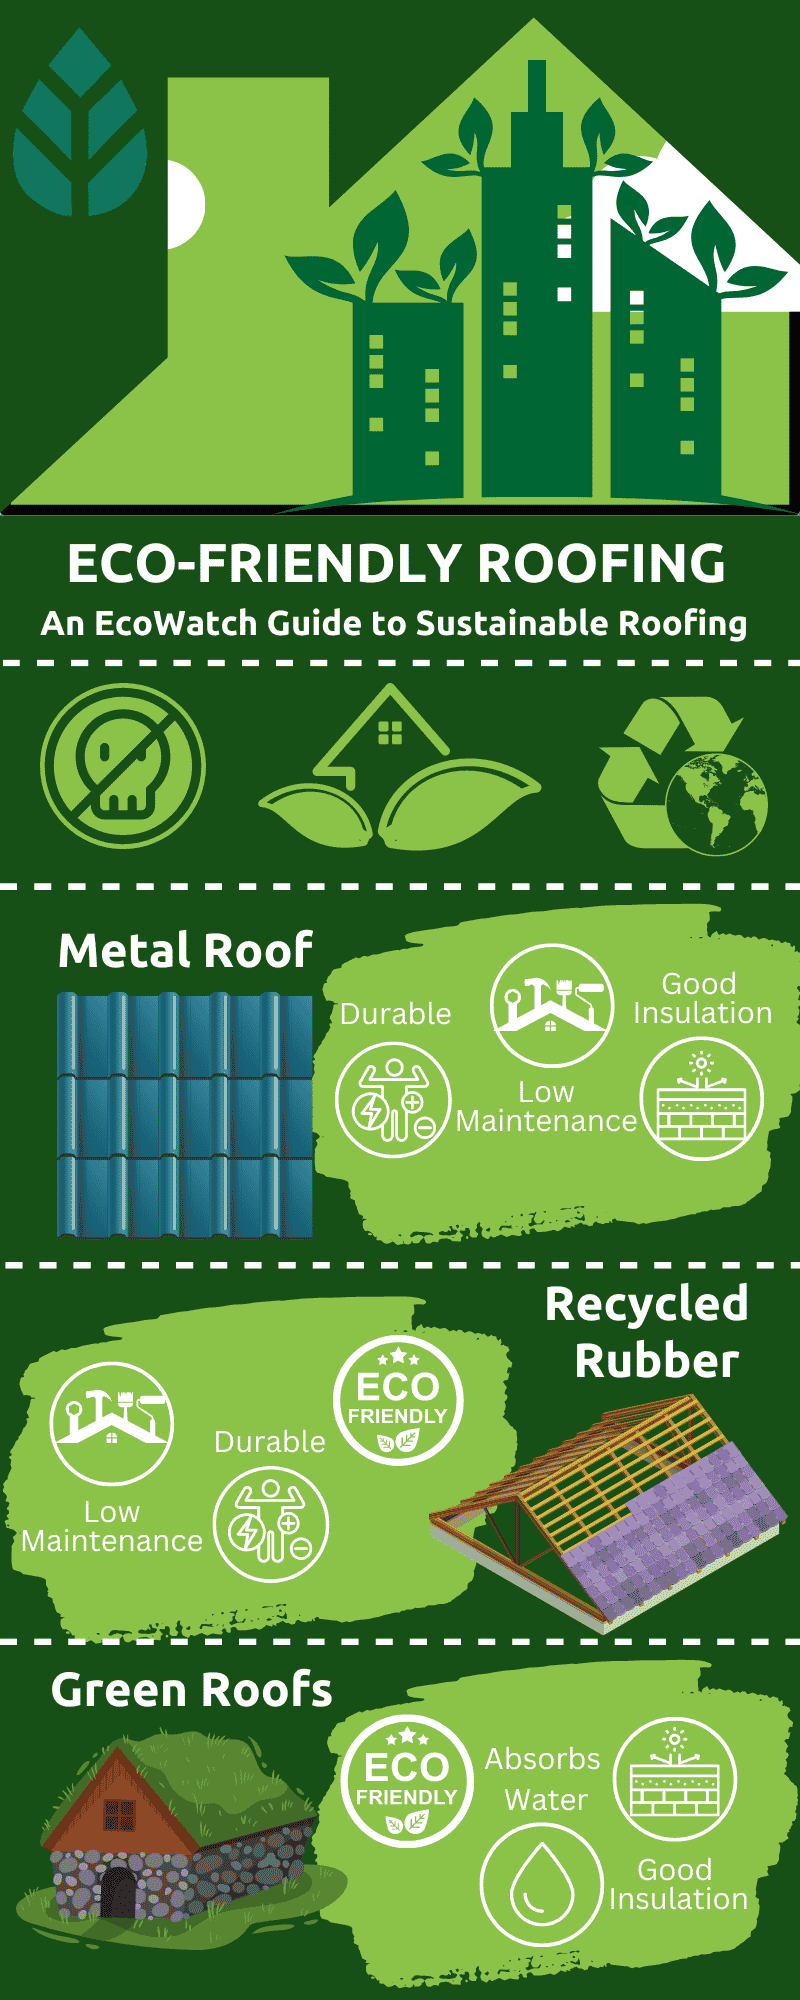 Eco-Friendly roofing options